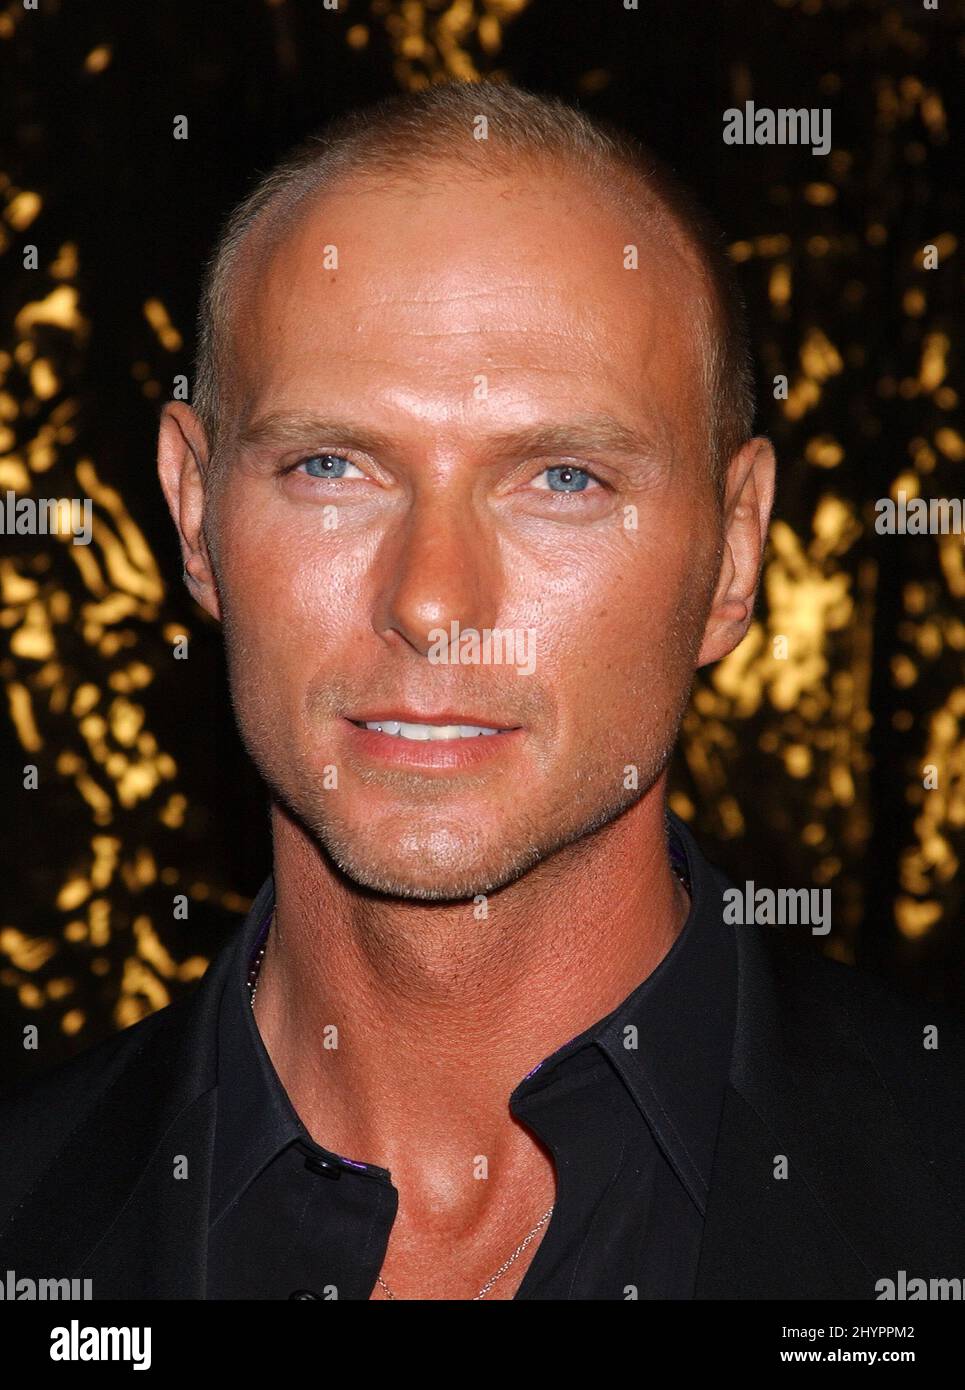 LUKE GOSS ATTENDS THE 'ABOUT SCHMIDT' PREMIERE AT THE ACADEMY THEATRE, LOS ANGELES. PICTURE: UK PRESS Stock Photo